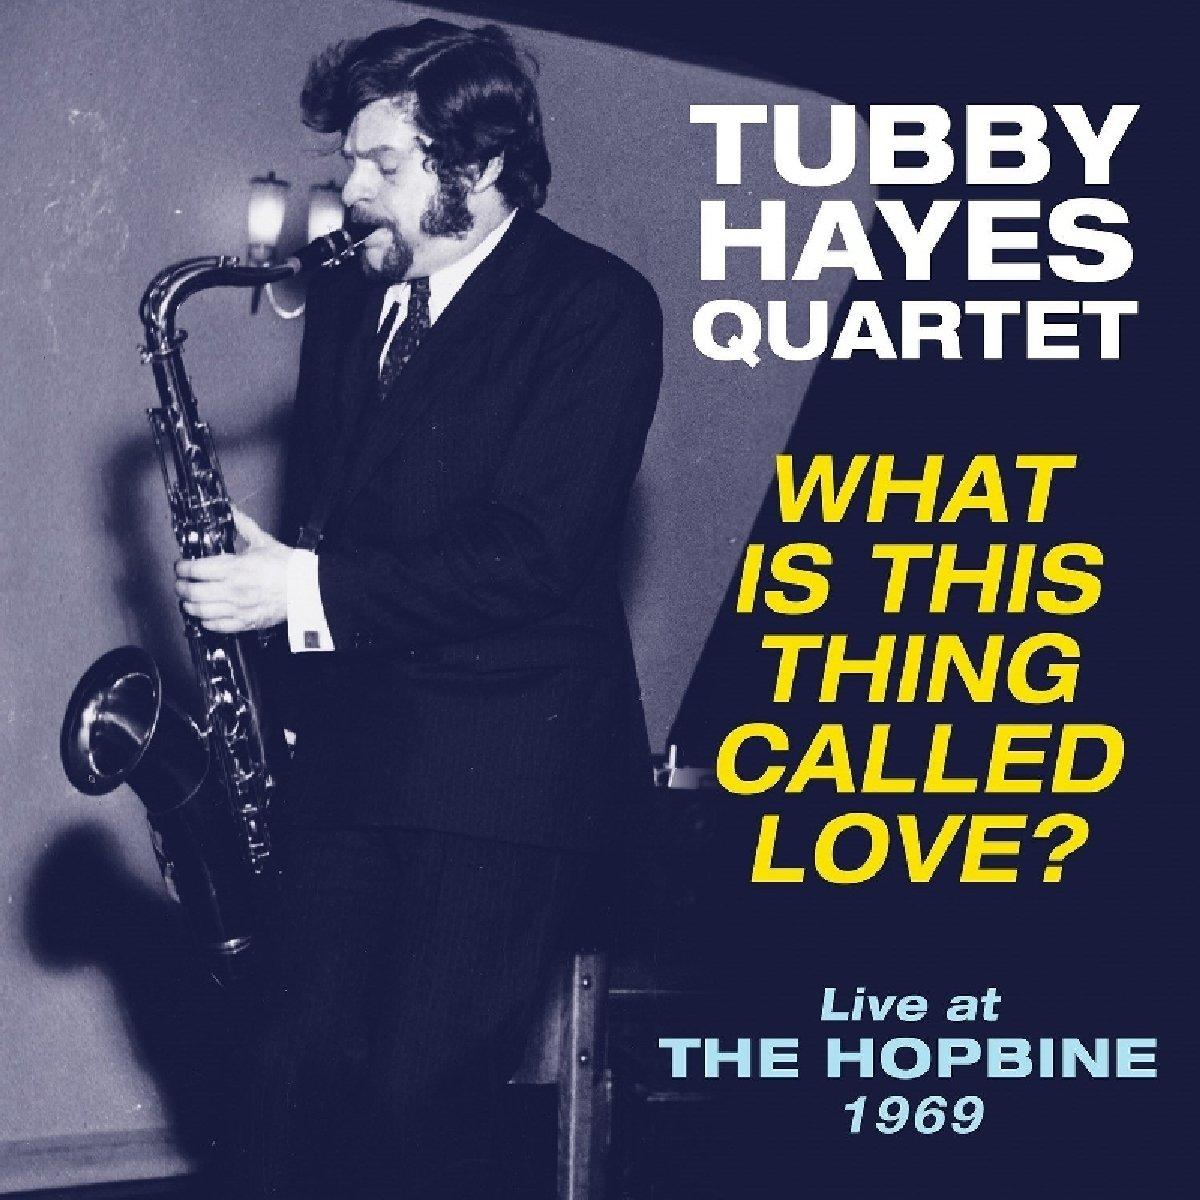 Tubby Quartet Hayes (Vinyl) Love? - Is This Thing - Called What